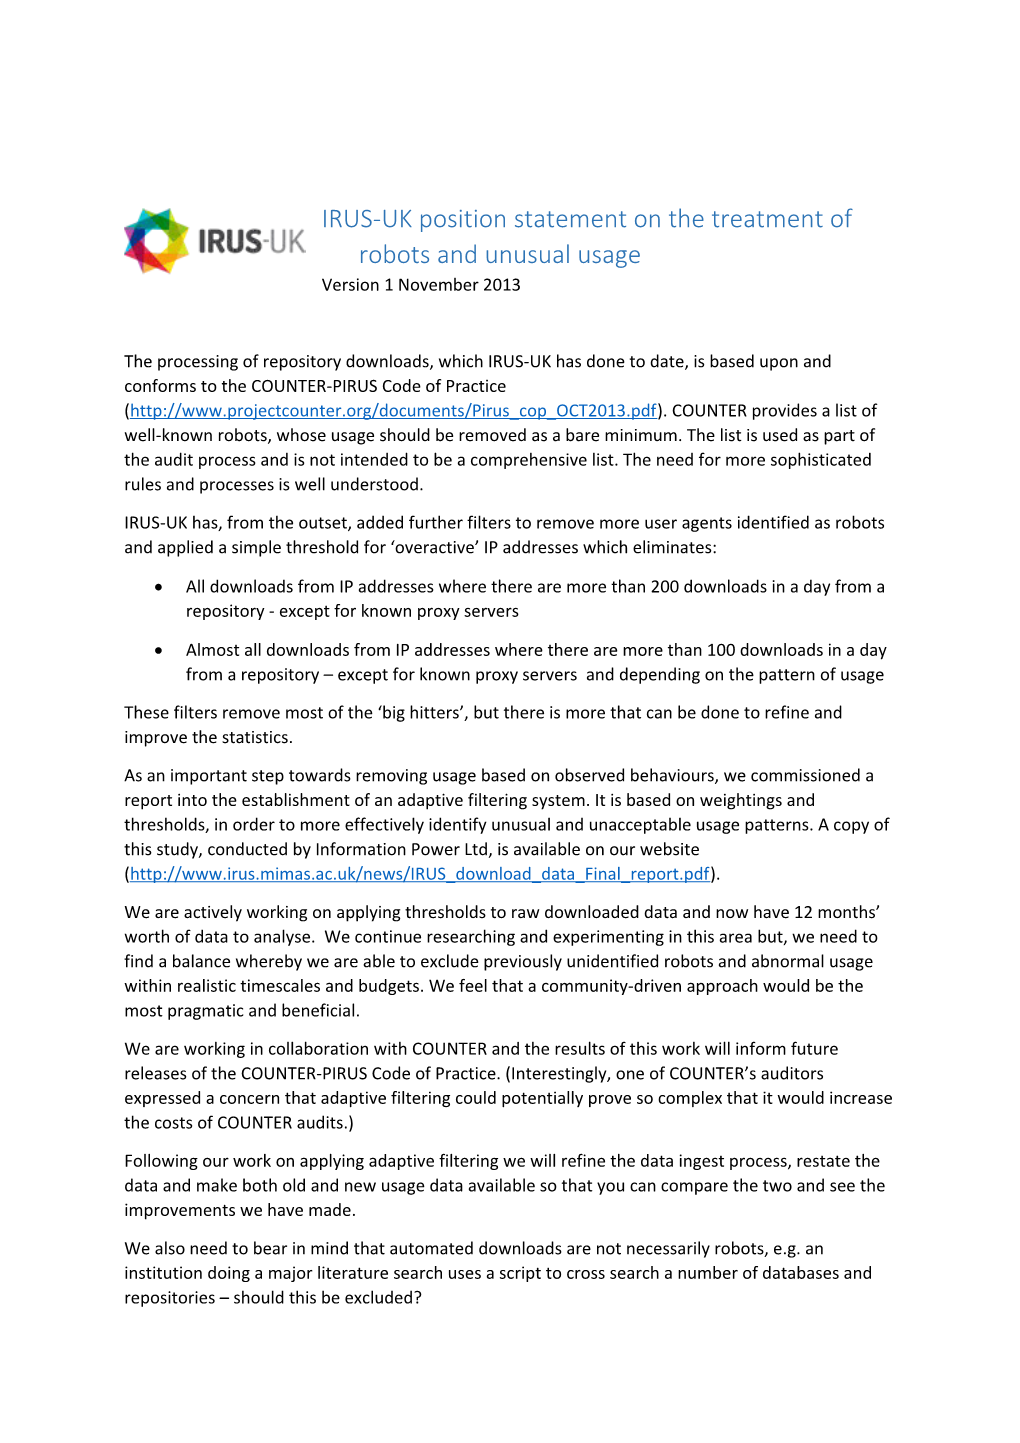 IRUS-UK Position Statement on the Treatment of Robots and Unusual Usage